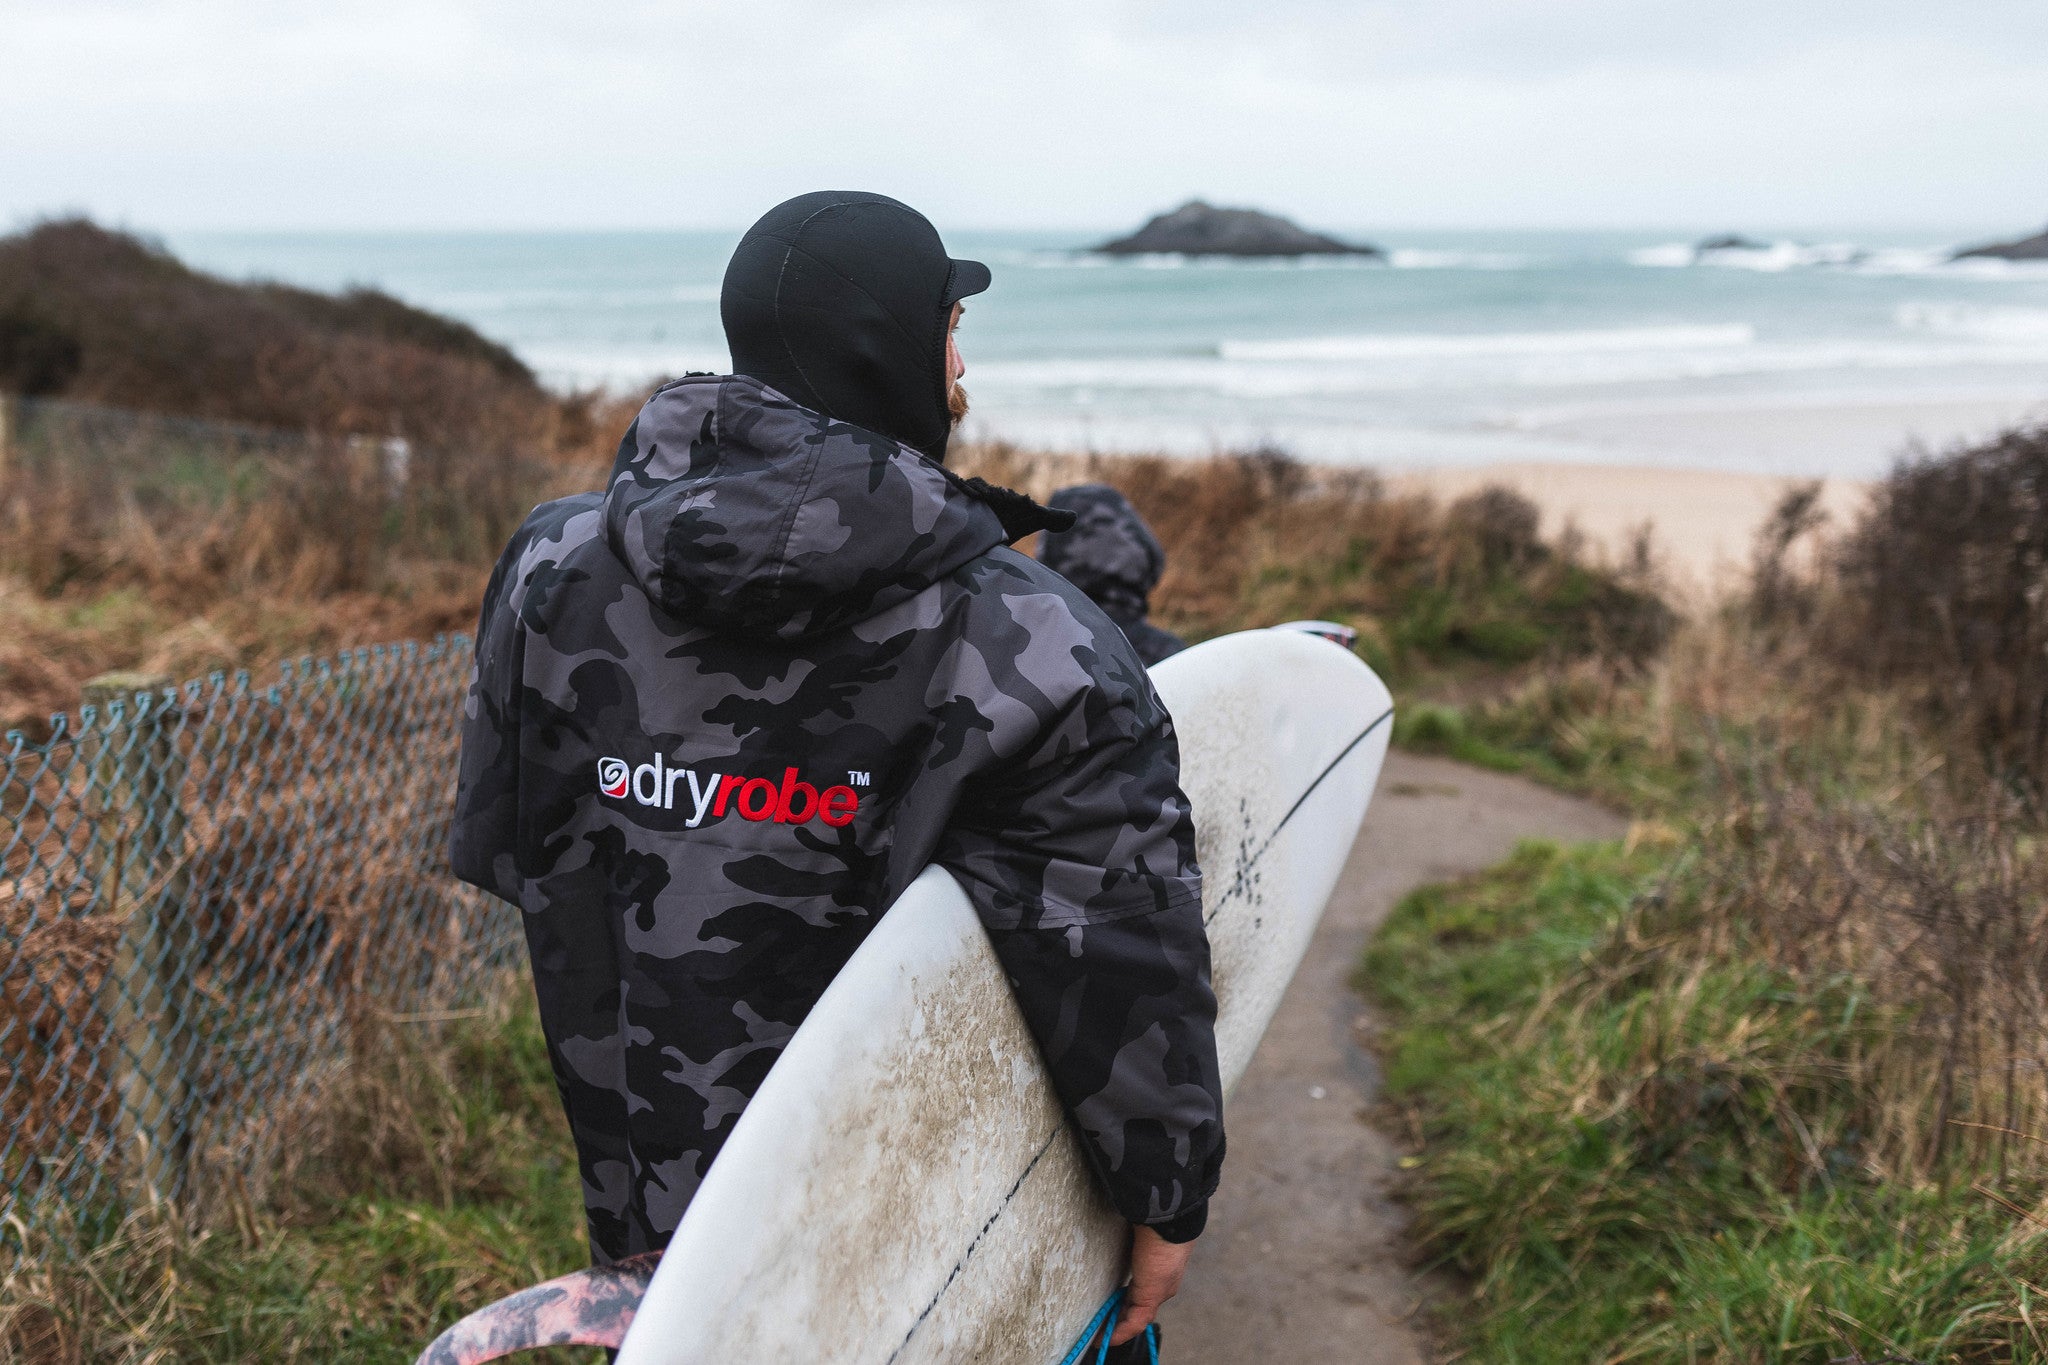 Ben skinner carry his surfboard to the beach whilst wear a Camo Black dryrobe Advance